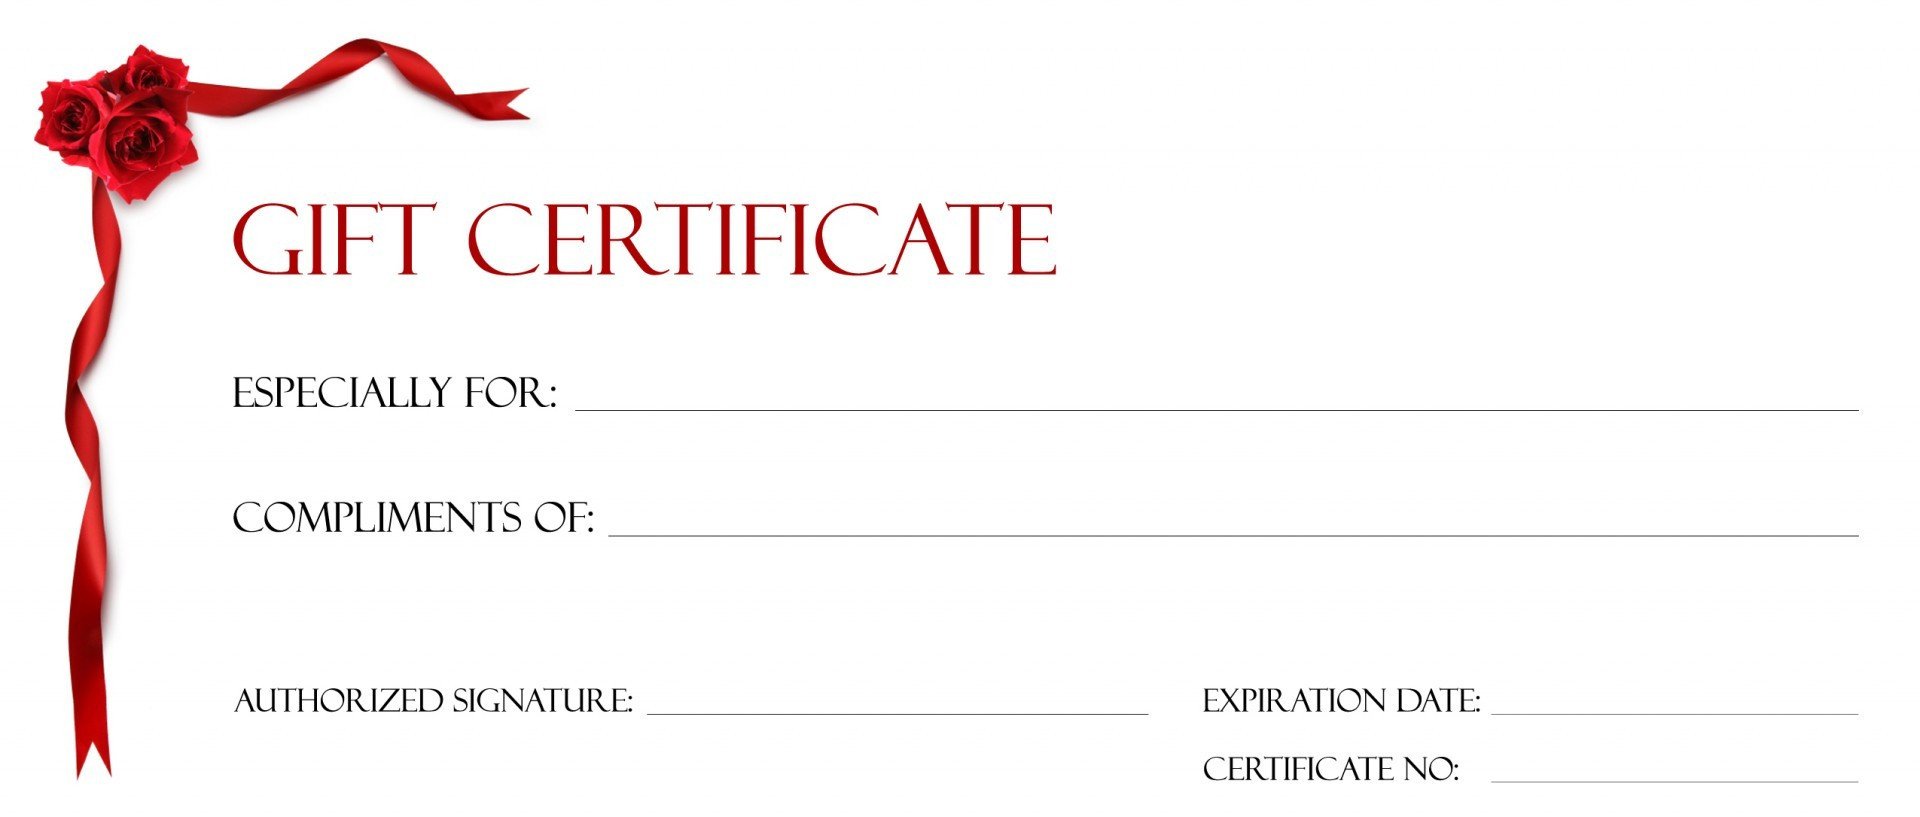 Gift Certificate Template For Google Docs